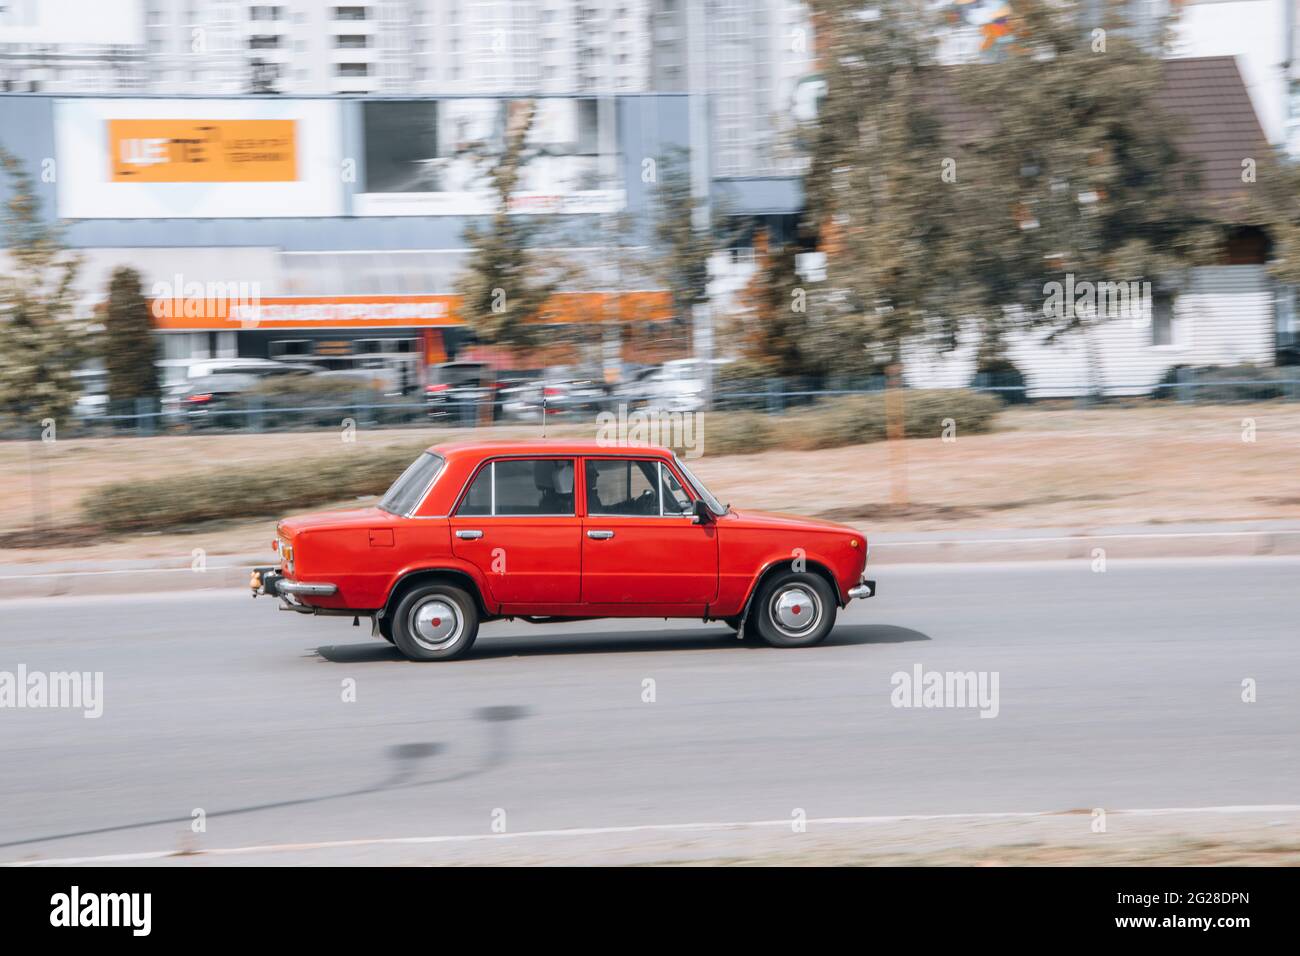 Ukraine, Kyiv - 13 May 2021: Red LADA 2101 car moving on the street. Editorial Stock Photo